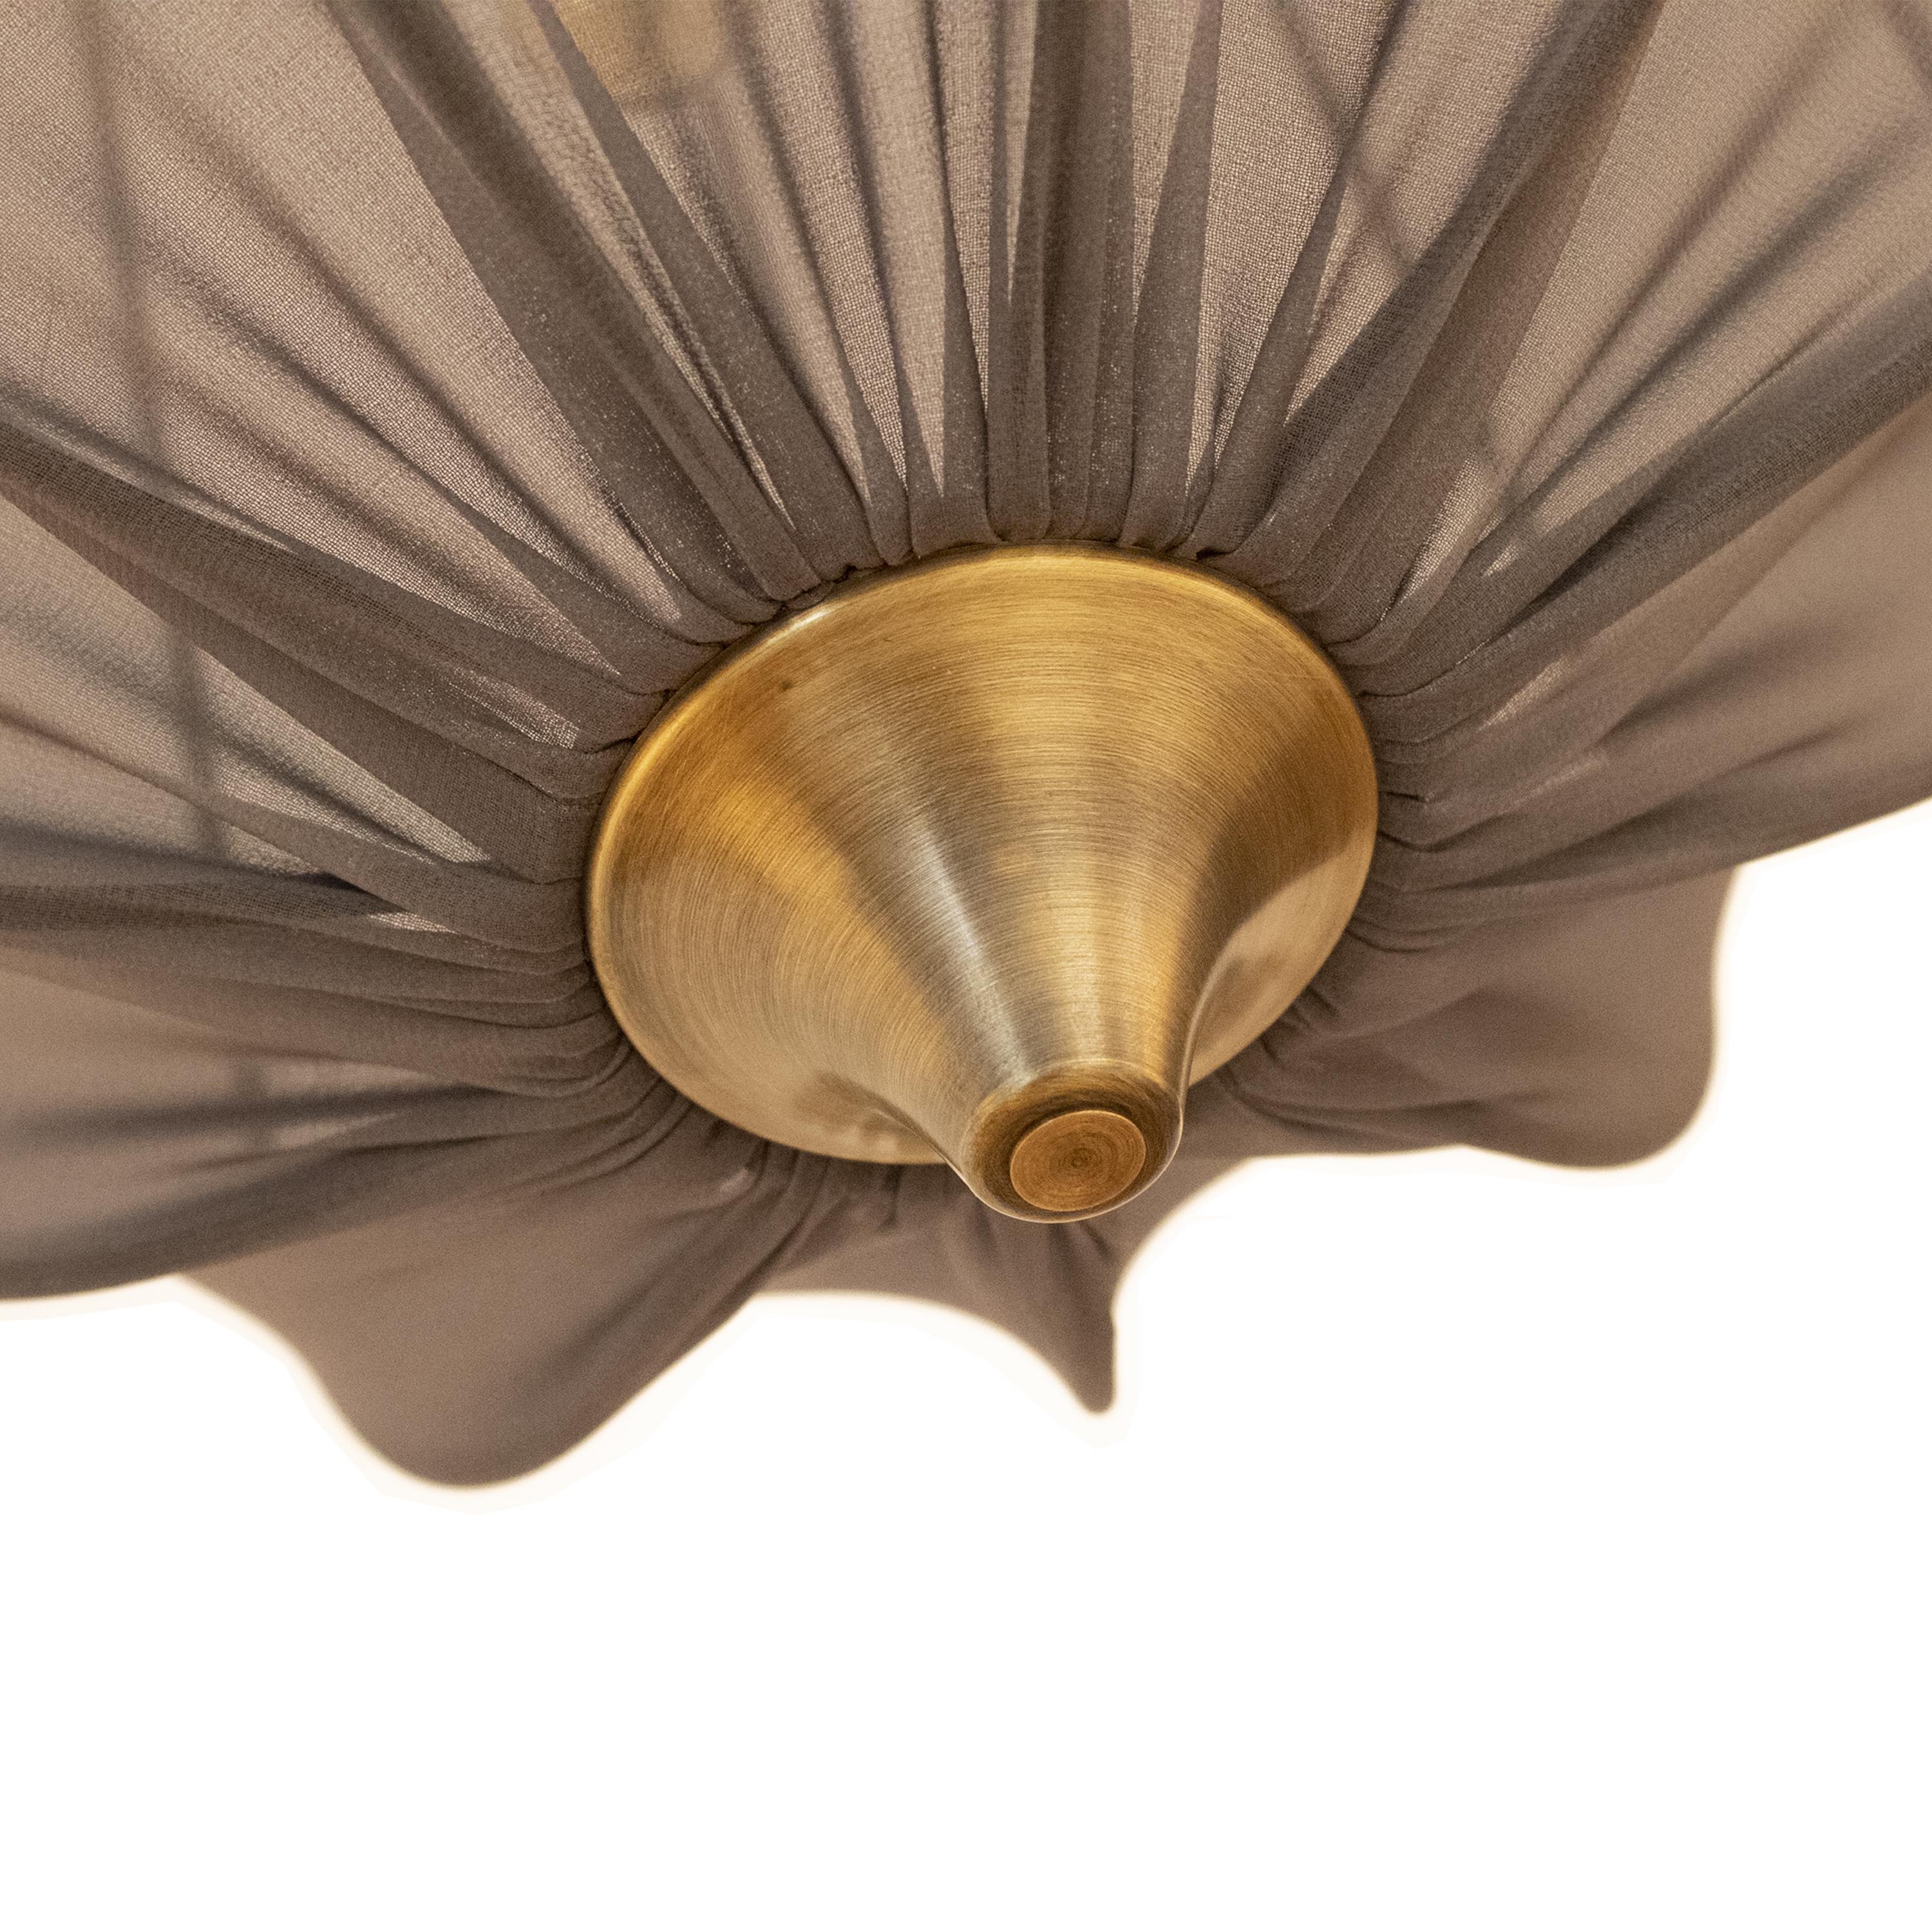 Contemporary Ovel Brass Pandent Light, Designed by IKB191, Spain, 2022 In New Condition For Sale In Madrid, ES